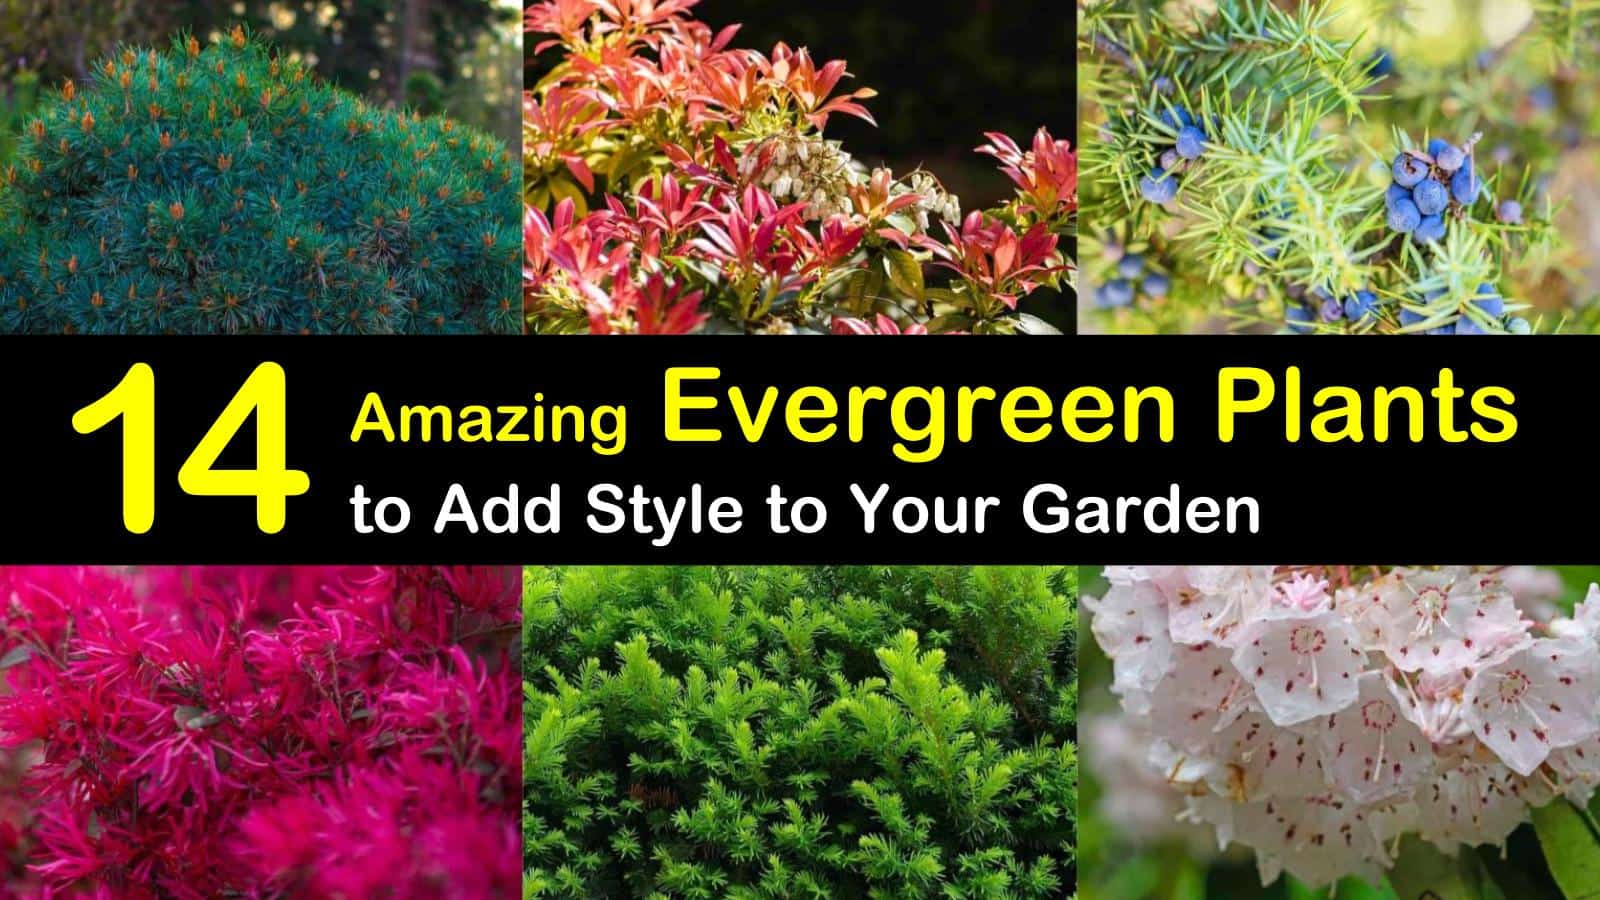 5 Amazing Evergreen Plants to Add Style to Your Garden